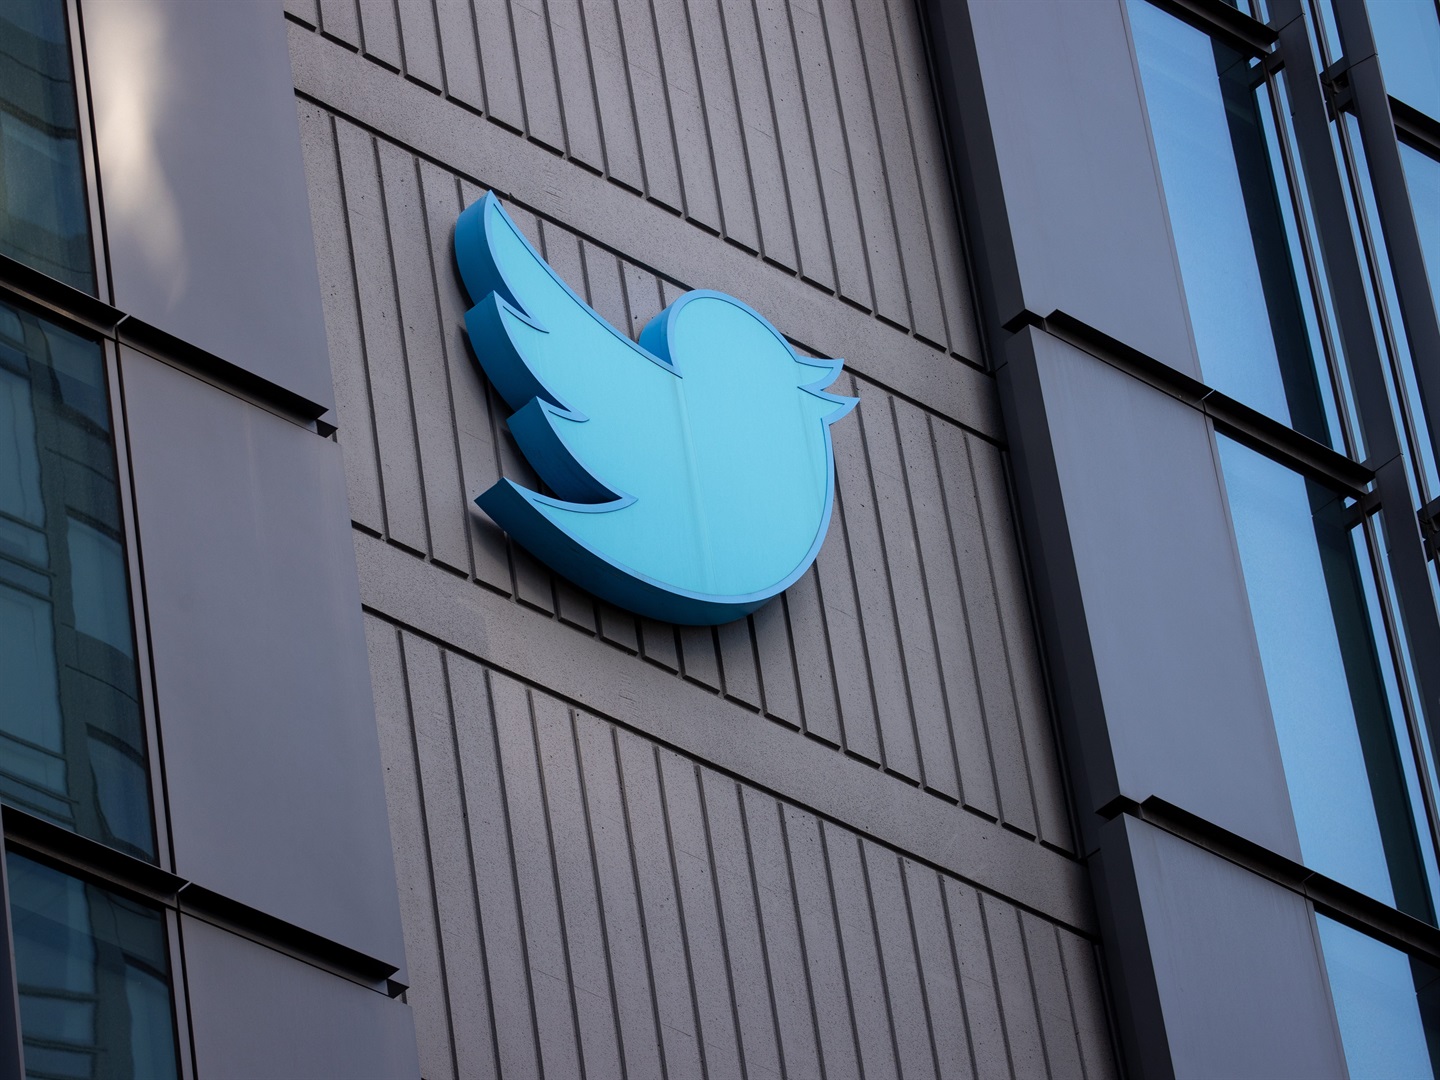 Twitter headquarters in San Francisco, California. Photo: Photo: Ayfun Coskun / Getty Images